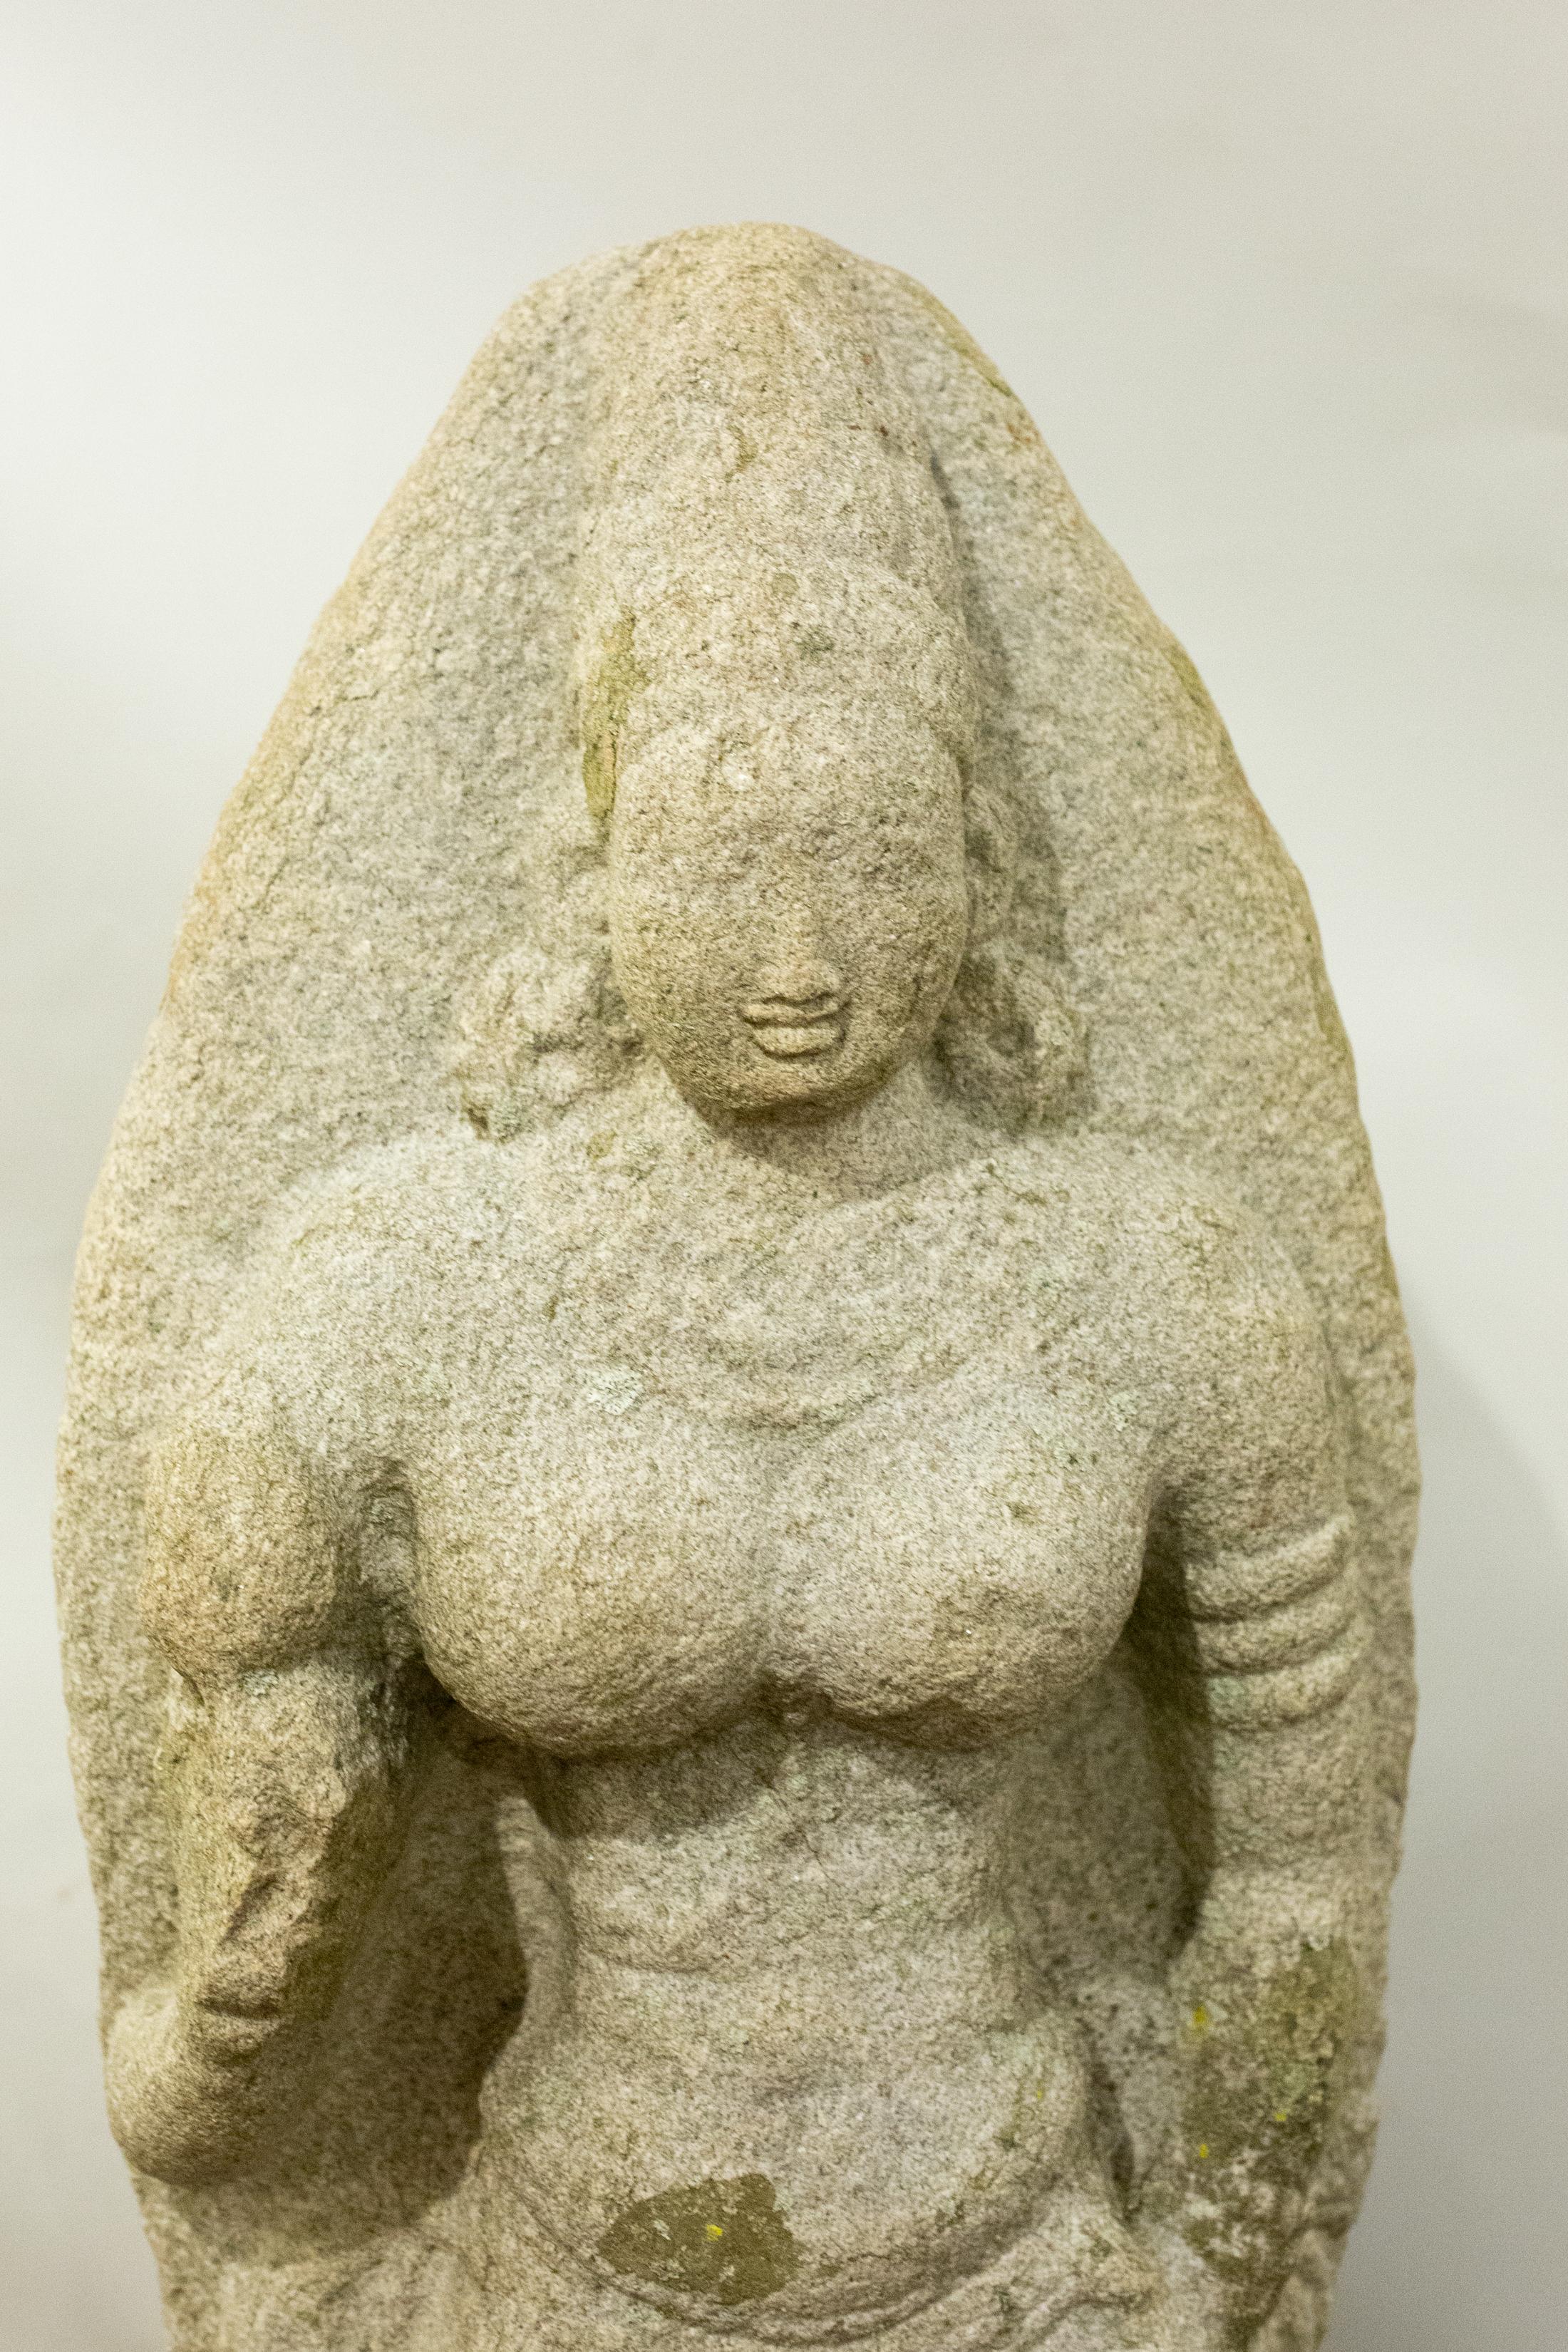 Indian grey granite figure of Bhudevi. Chola Dynasty (9th-14th centuries) sculpture of Bhudevi, Bhu translates to Earth and Devi translates to god or diety. Made in Tamil Nadu, Southern India. Set on a base. India, 9th-10th century.
Sculpture